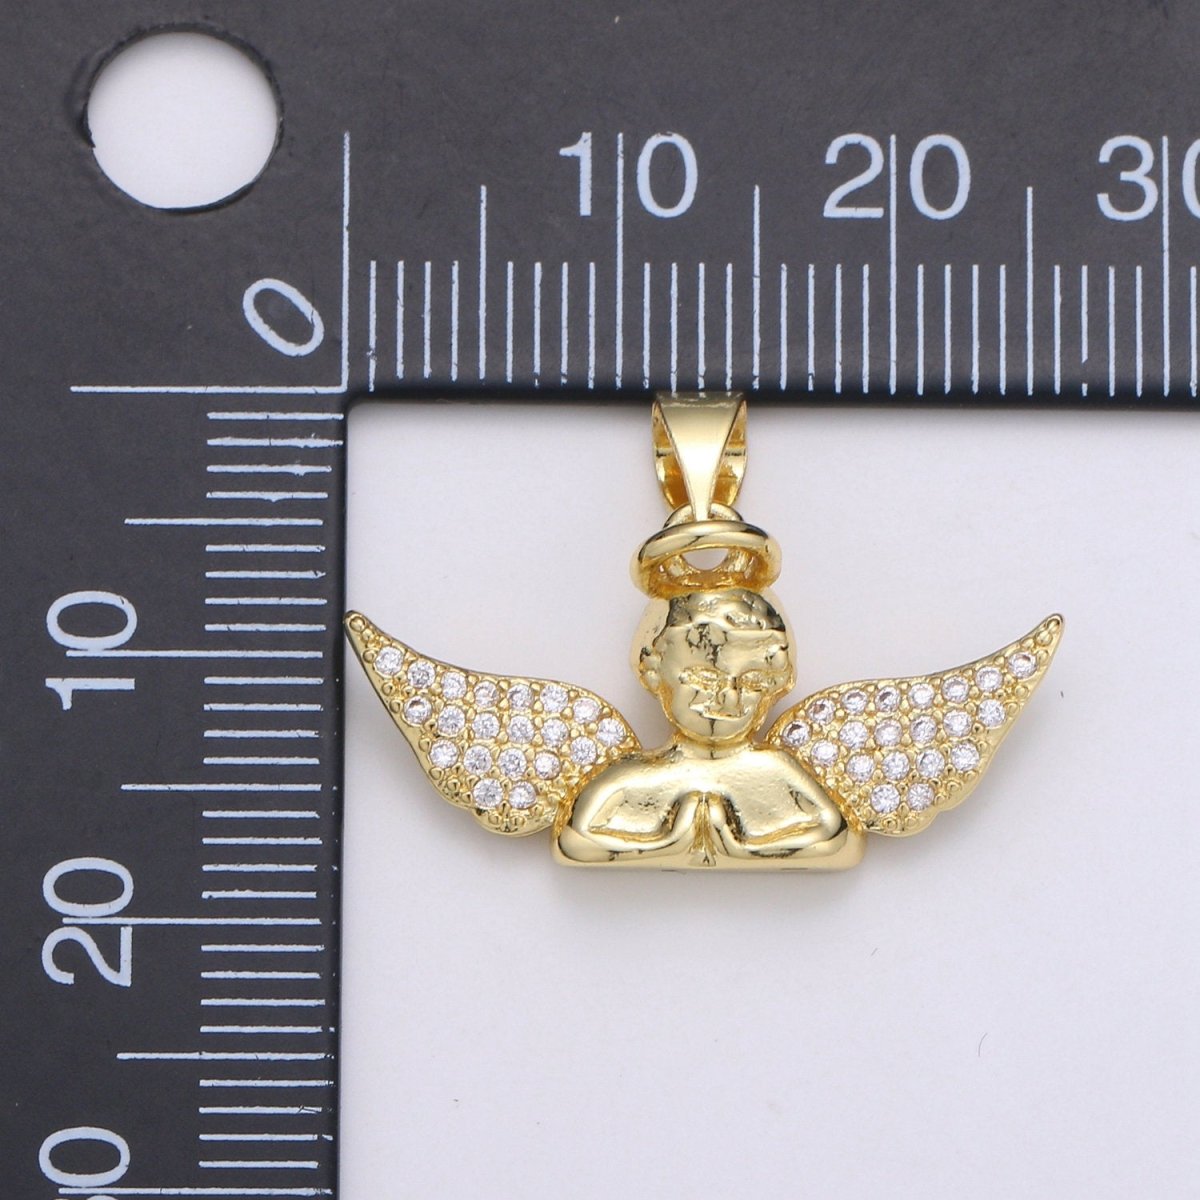 24k Gold Filled CZ Roman Angel Pendant Angel Cluster Cubic Wings Charm Ceraphim Pendant Jewelry Making Supply J-060 - DLUXCA